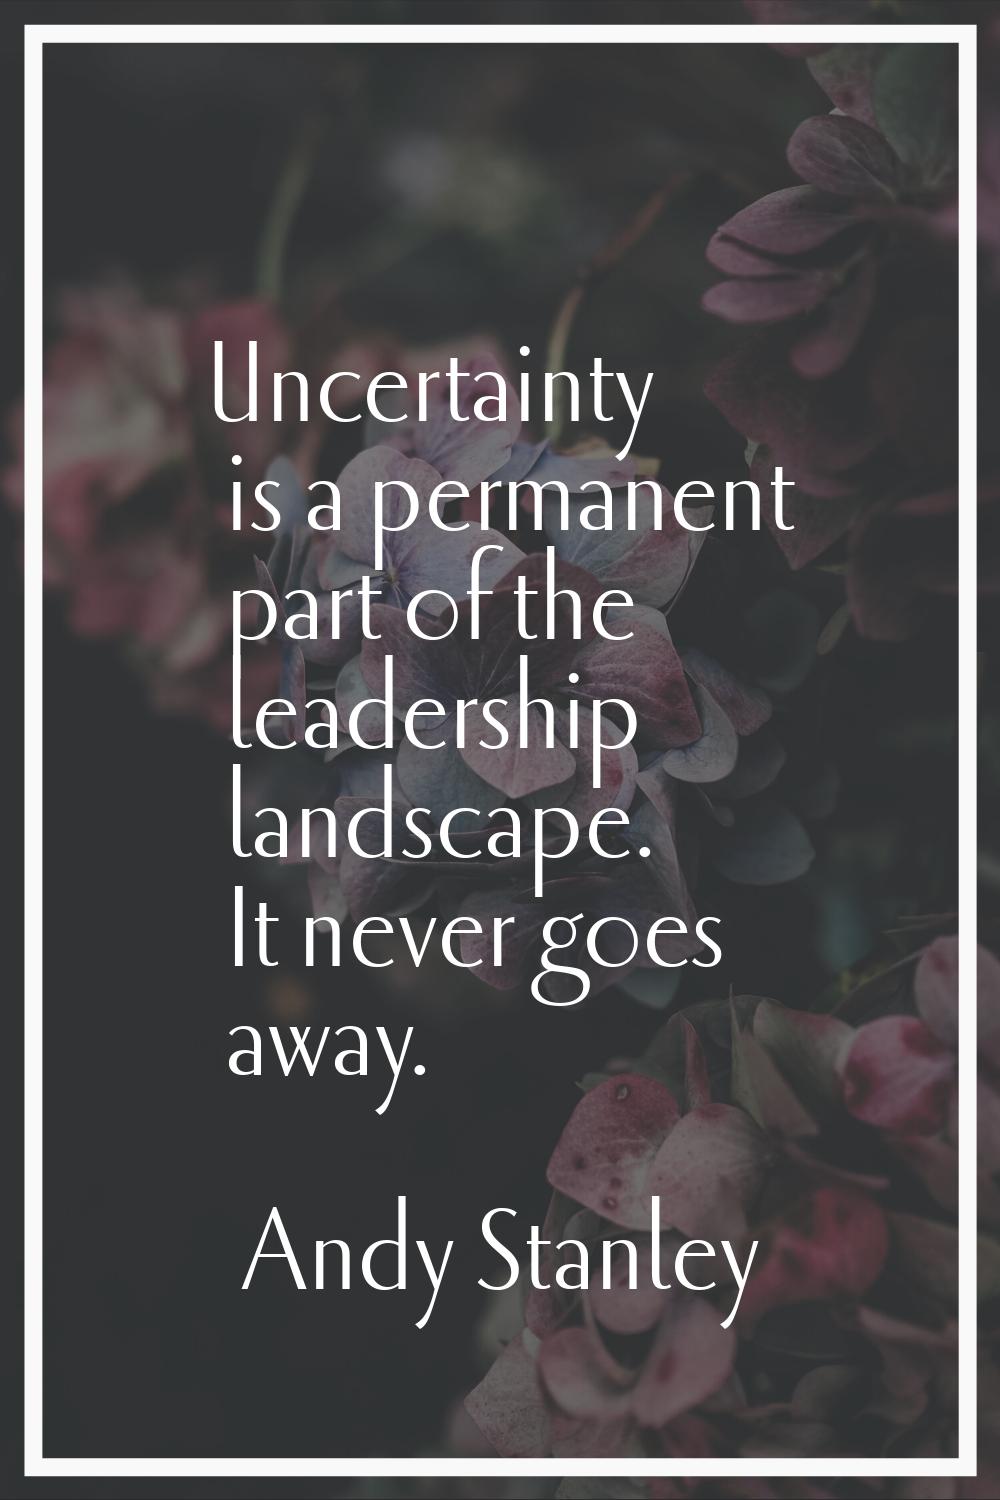 Uncertainty is a permanent part of the leadership landscape. It never goes away.